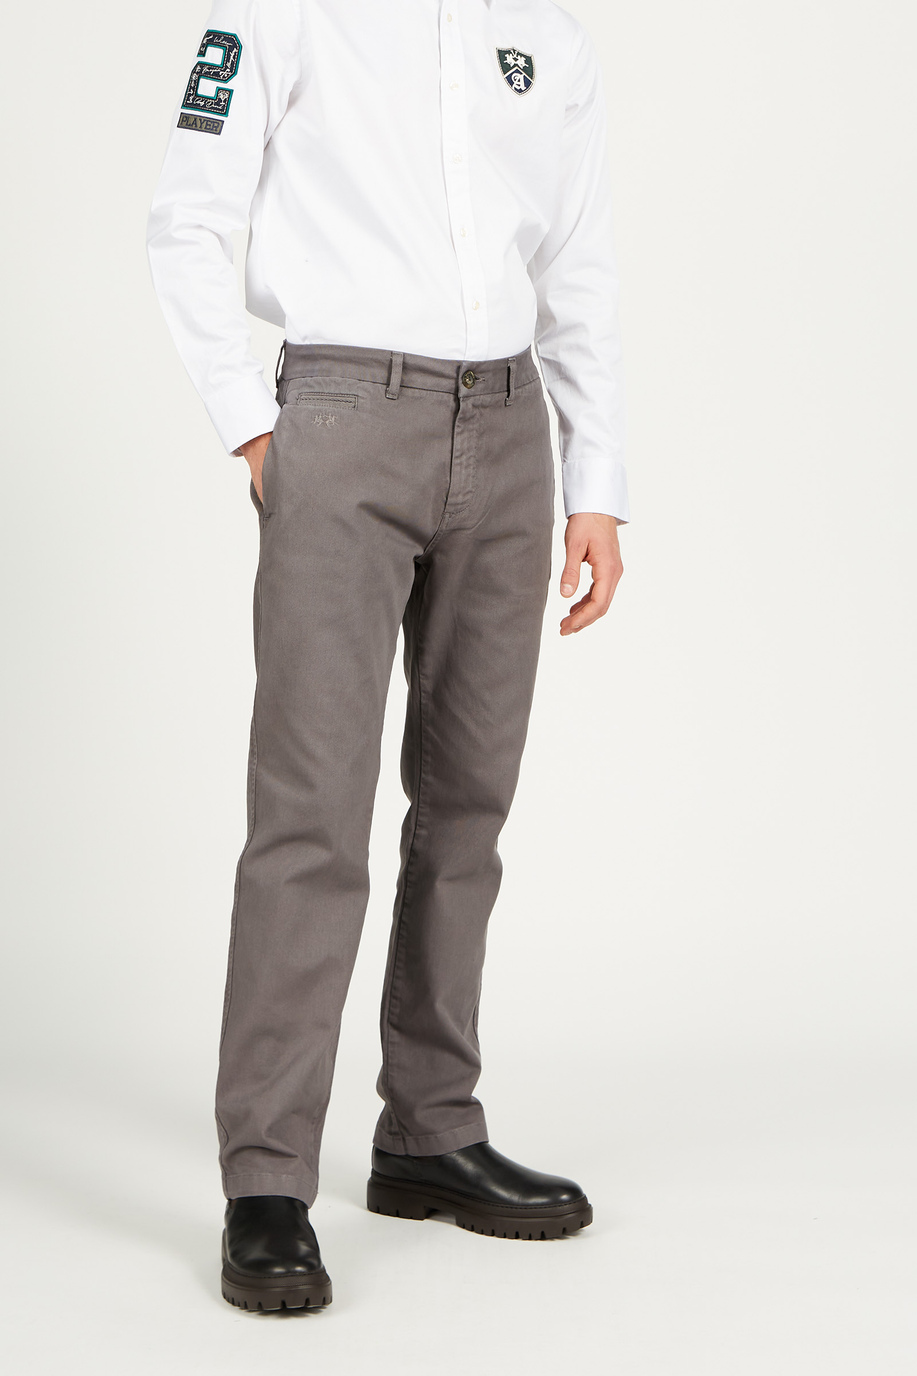 Men’s trousers in cotton regular fit chino model - Polo Academy | La Martina - Official Online Shop